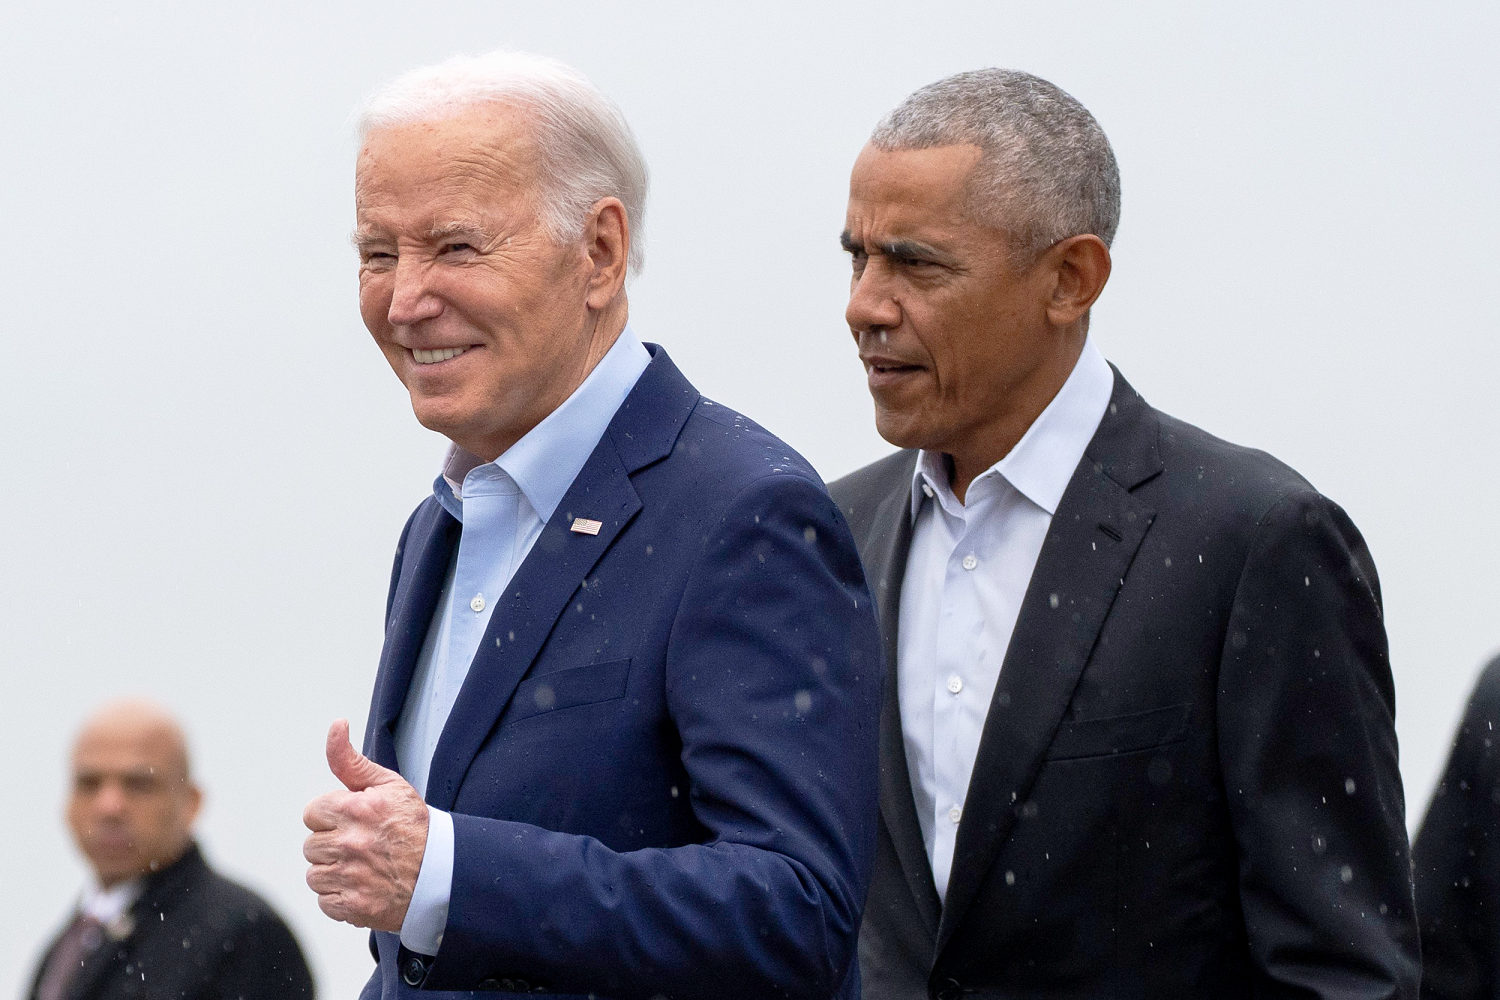 3 presidents, celebrity performances and $25 million: Biden rakes in cash at NYC fundraiser